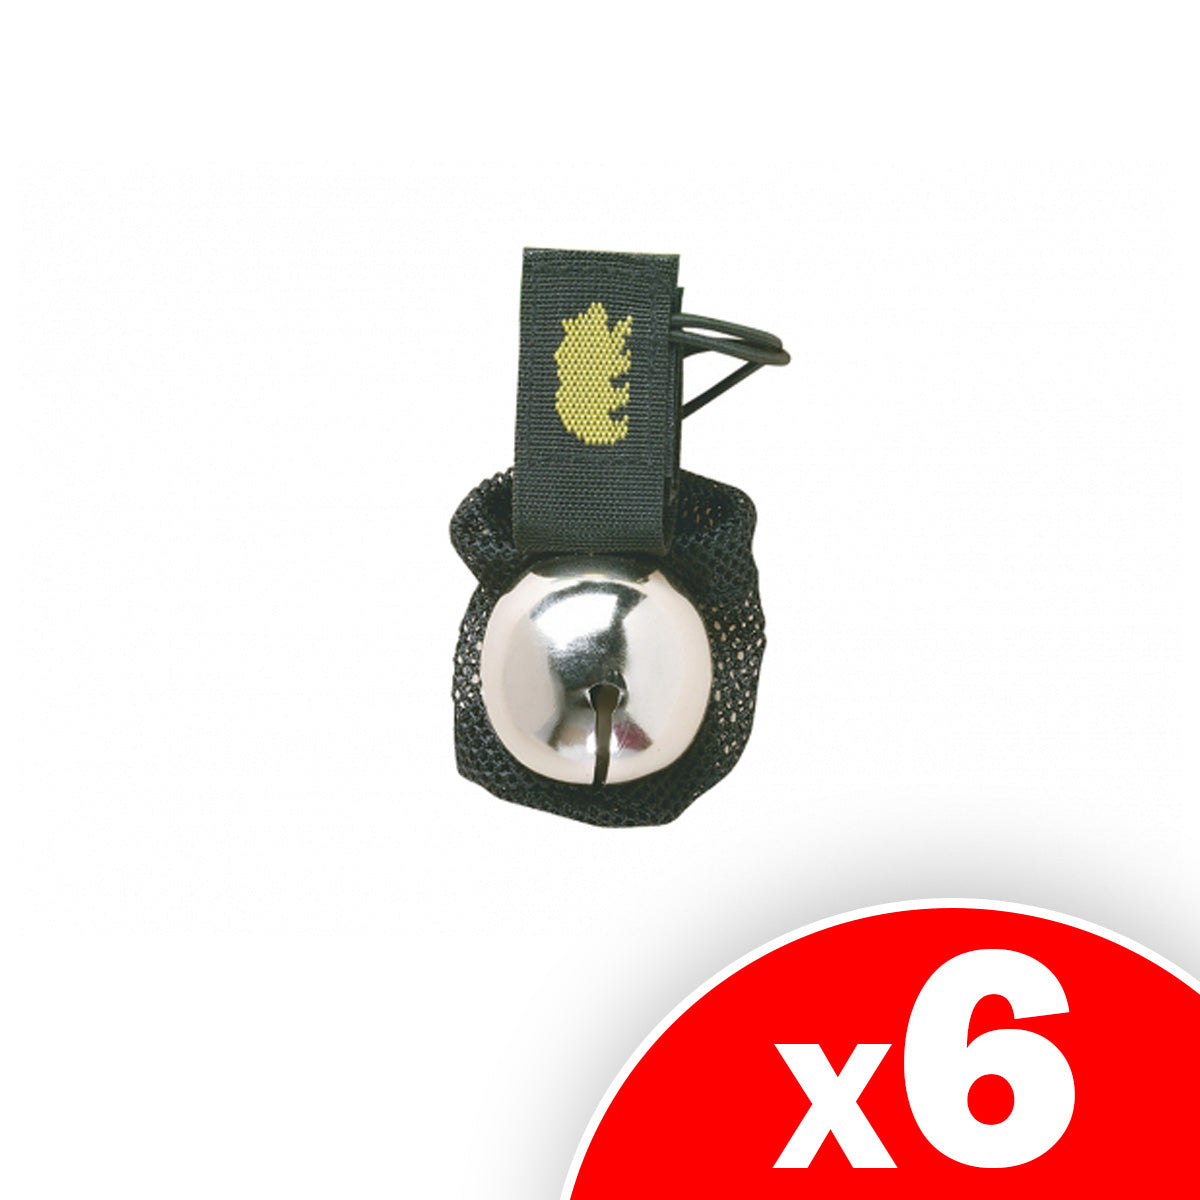 Coghlan's 2-Person Hiking Bundle - Includes: 2-Bear Bells w/Silencer and 2-Mosquito Head Nets, 6 Pack